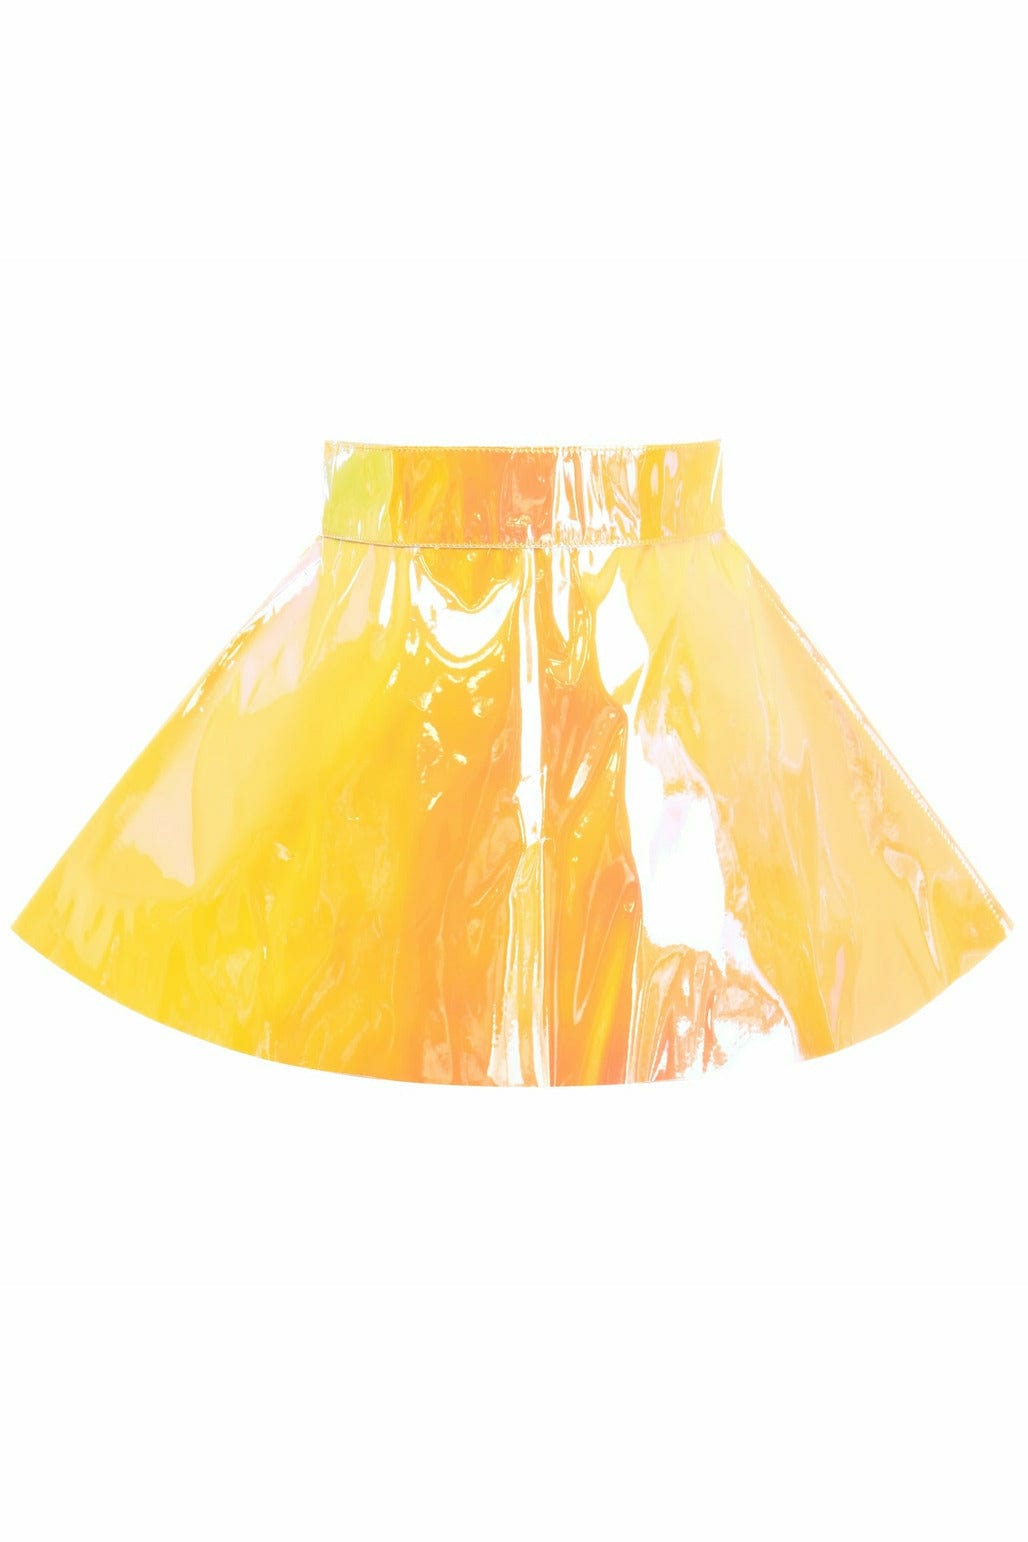 Yellow with Pink Hologram Skater Skirt Musotica.com